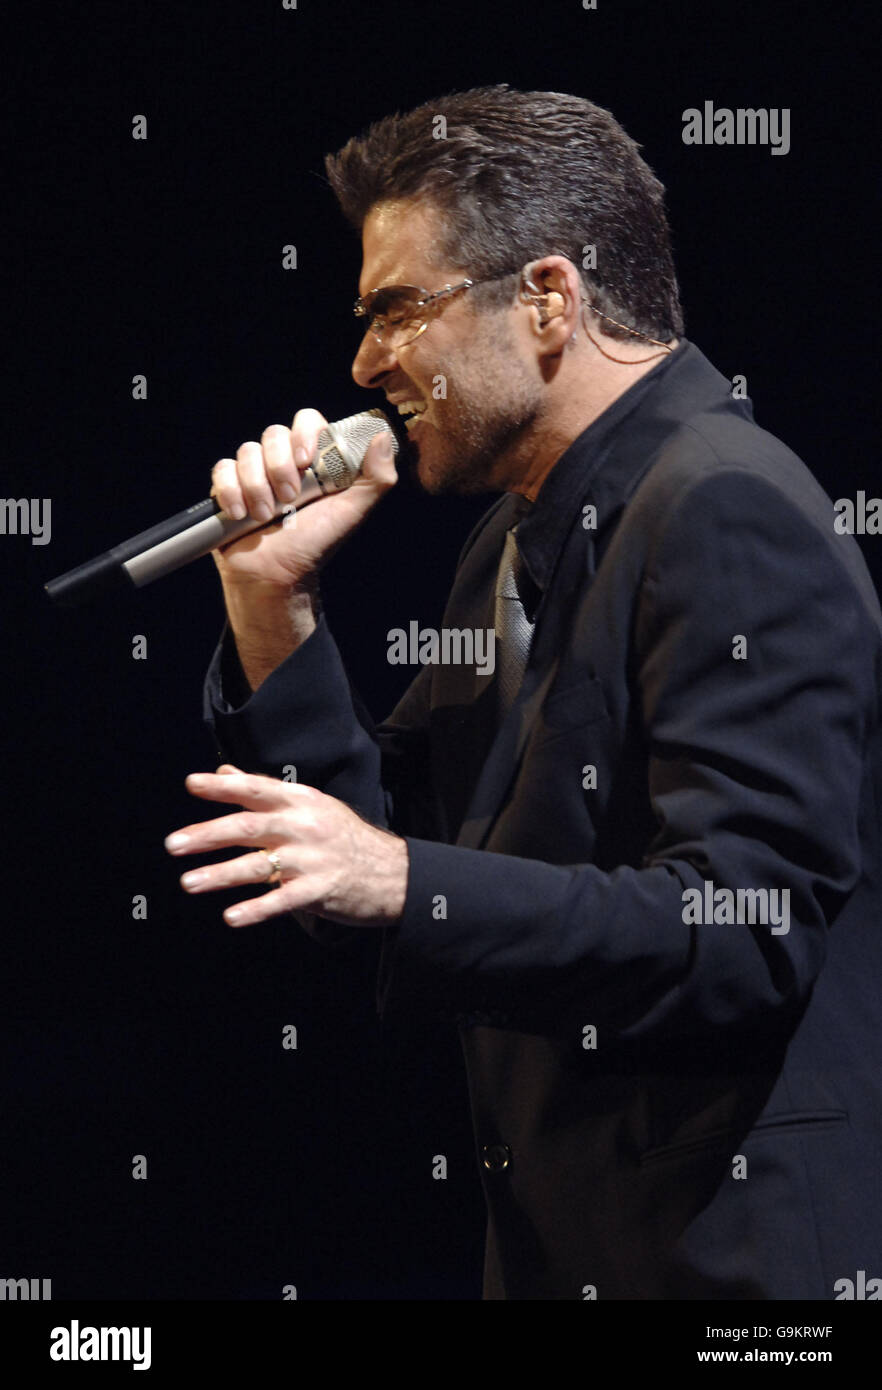 Singer George Michael performs at the MEN Arena in Manchester during his '25 Live' world tour. Stock Photo